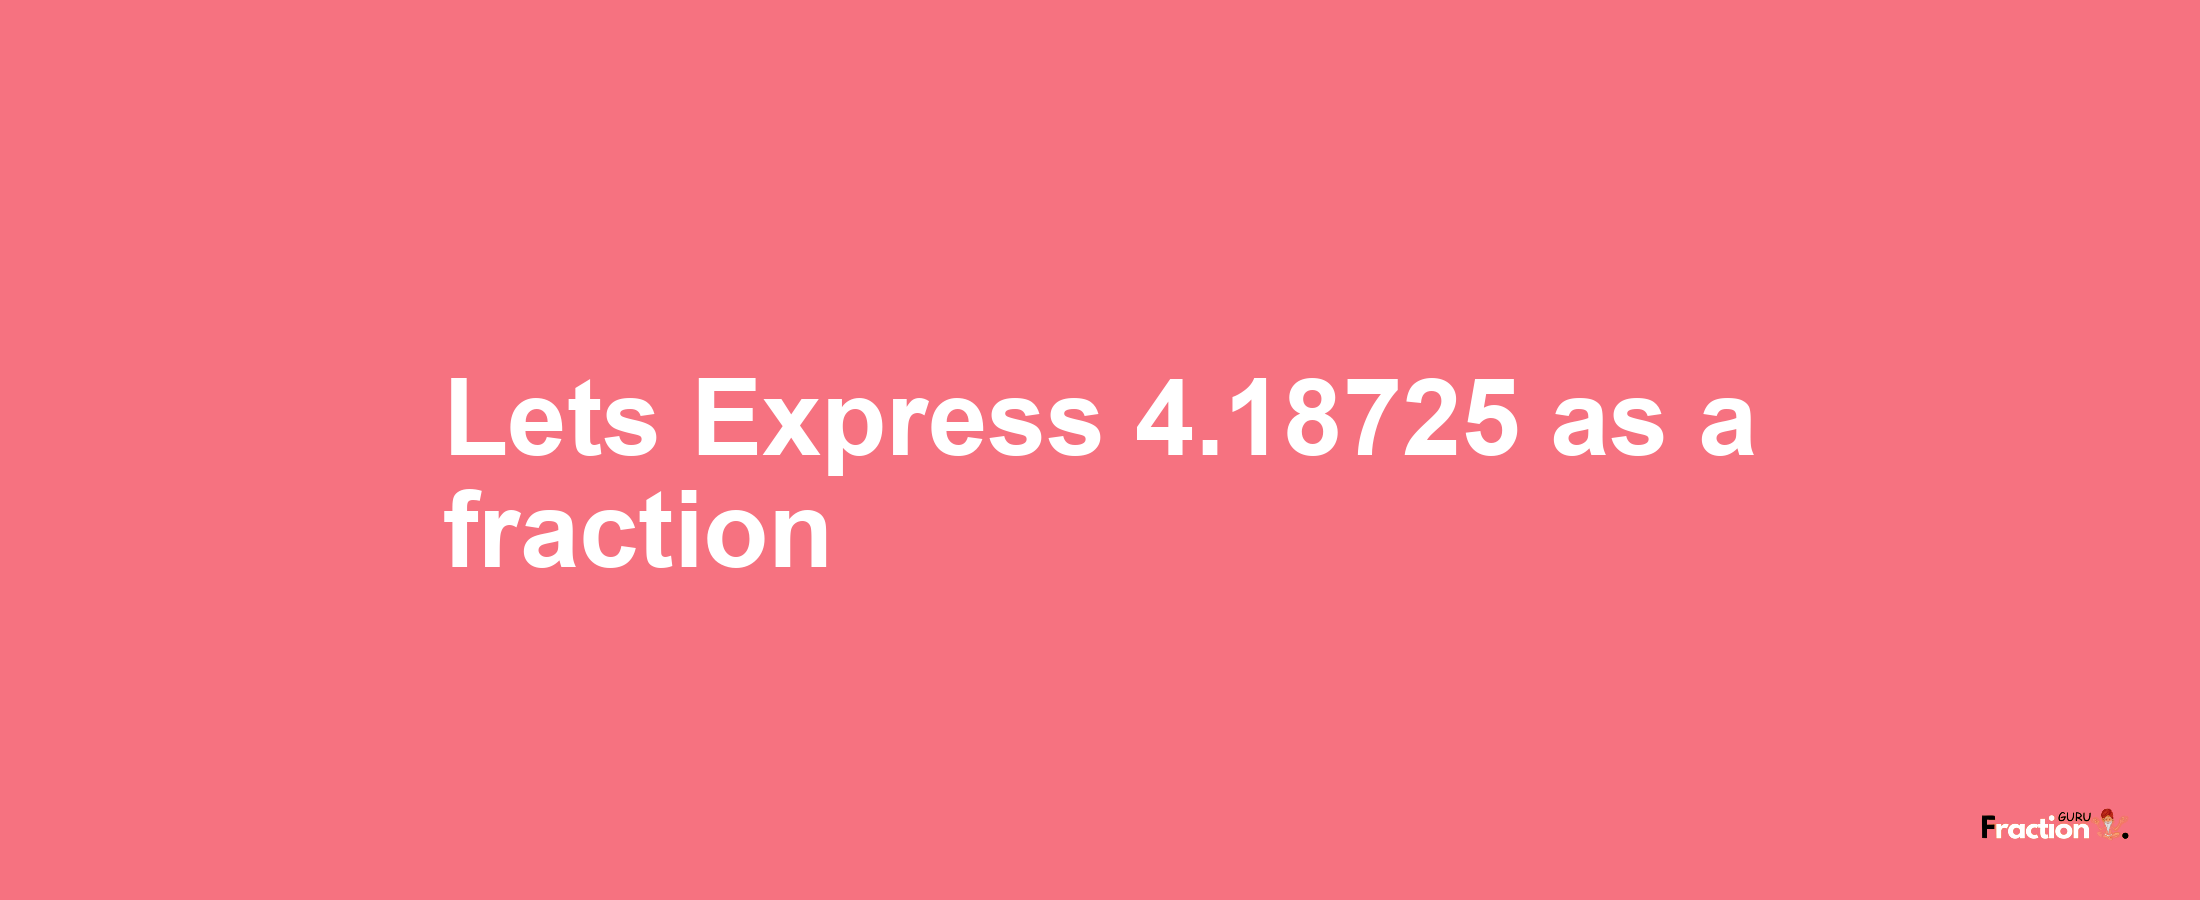 Lets Express 4.18725 as afraction